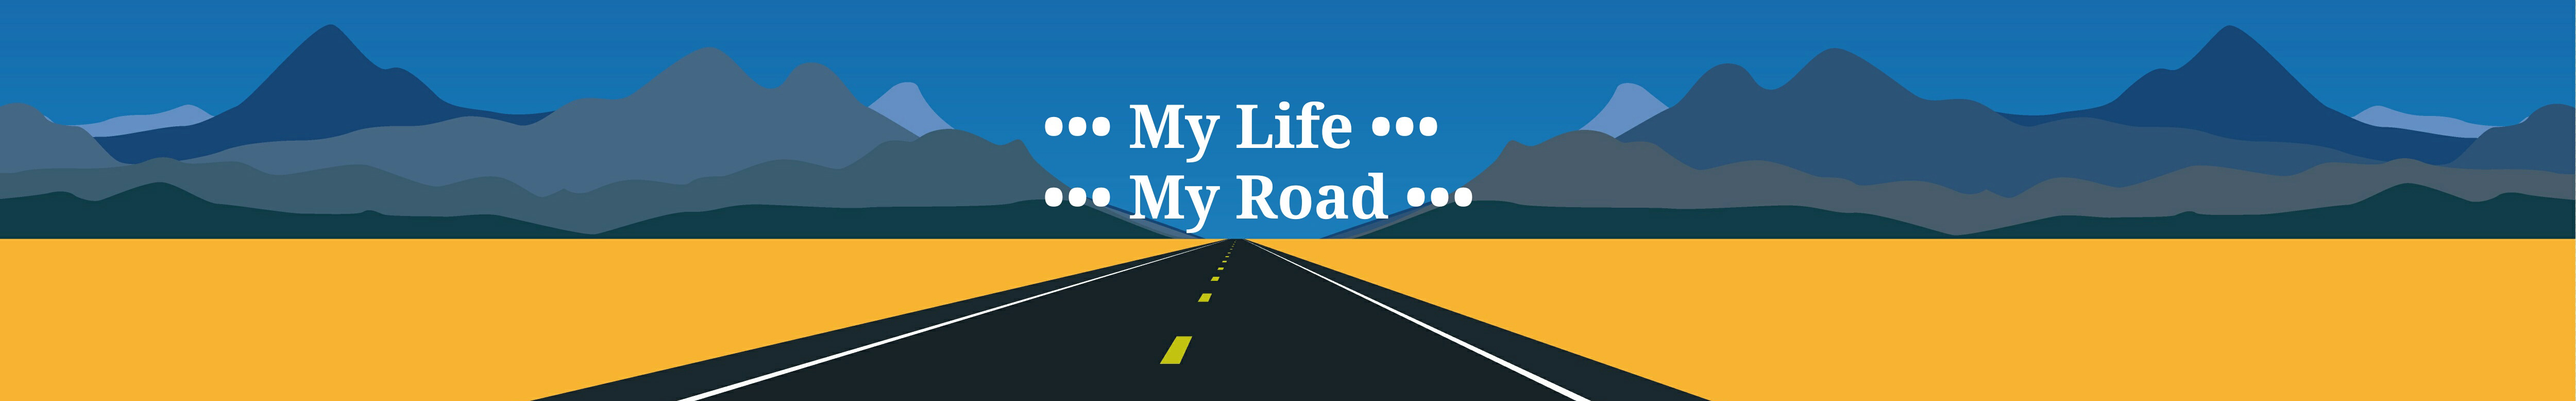 My Life My Road's profile banner